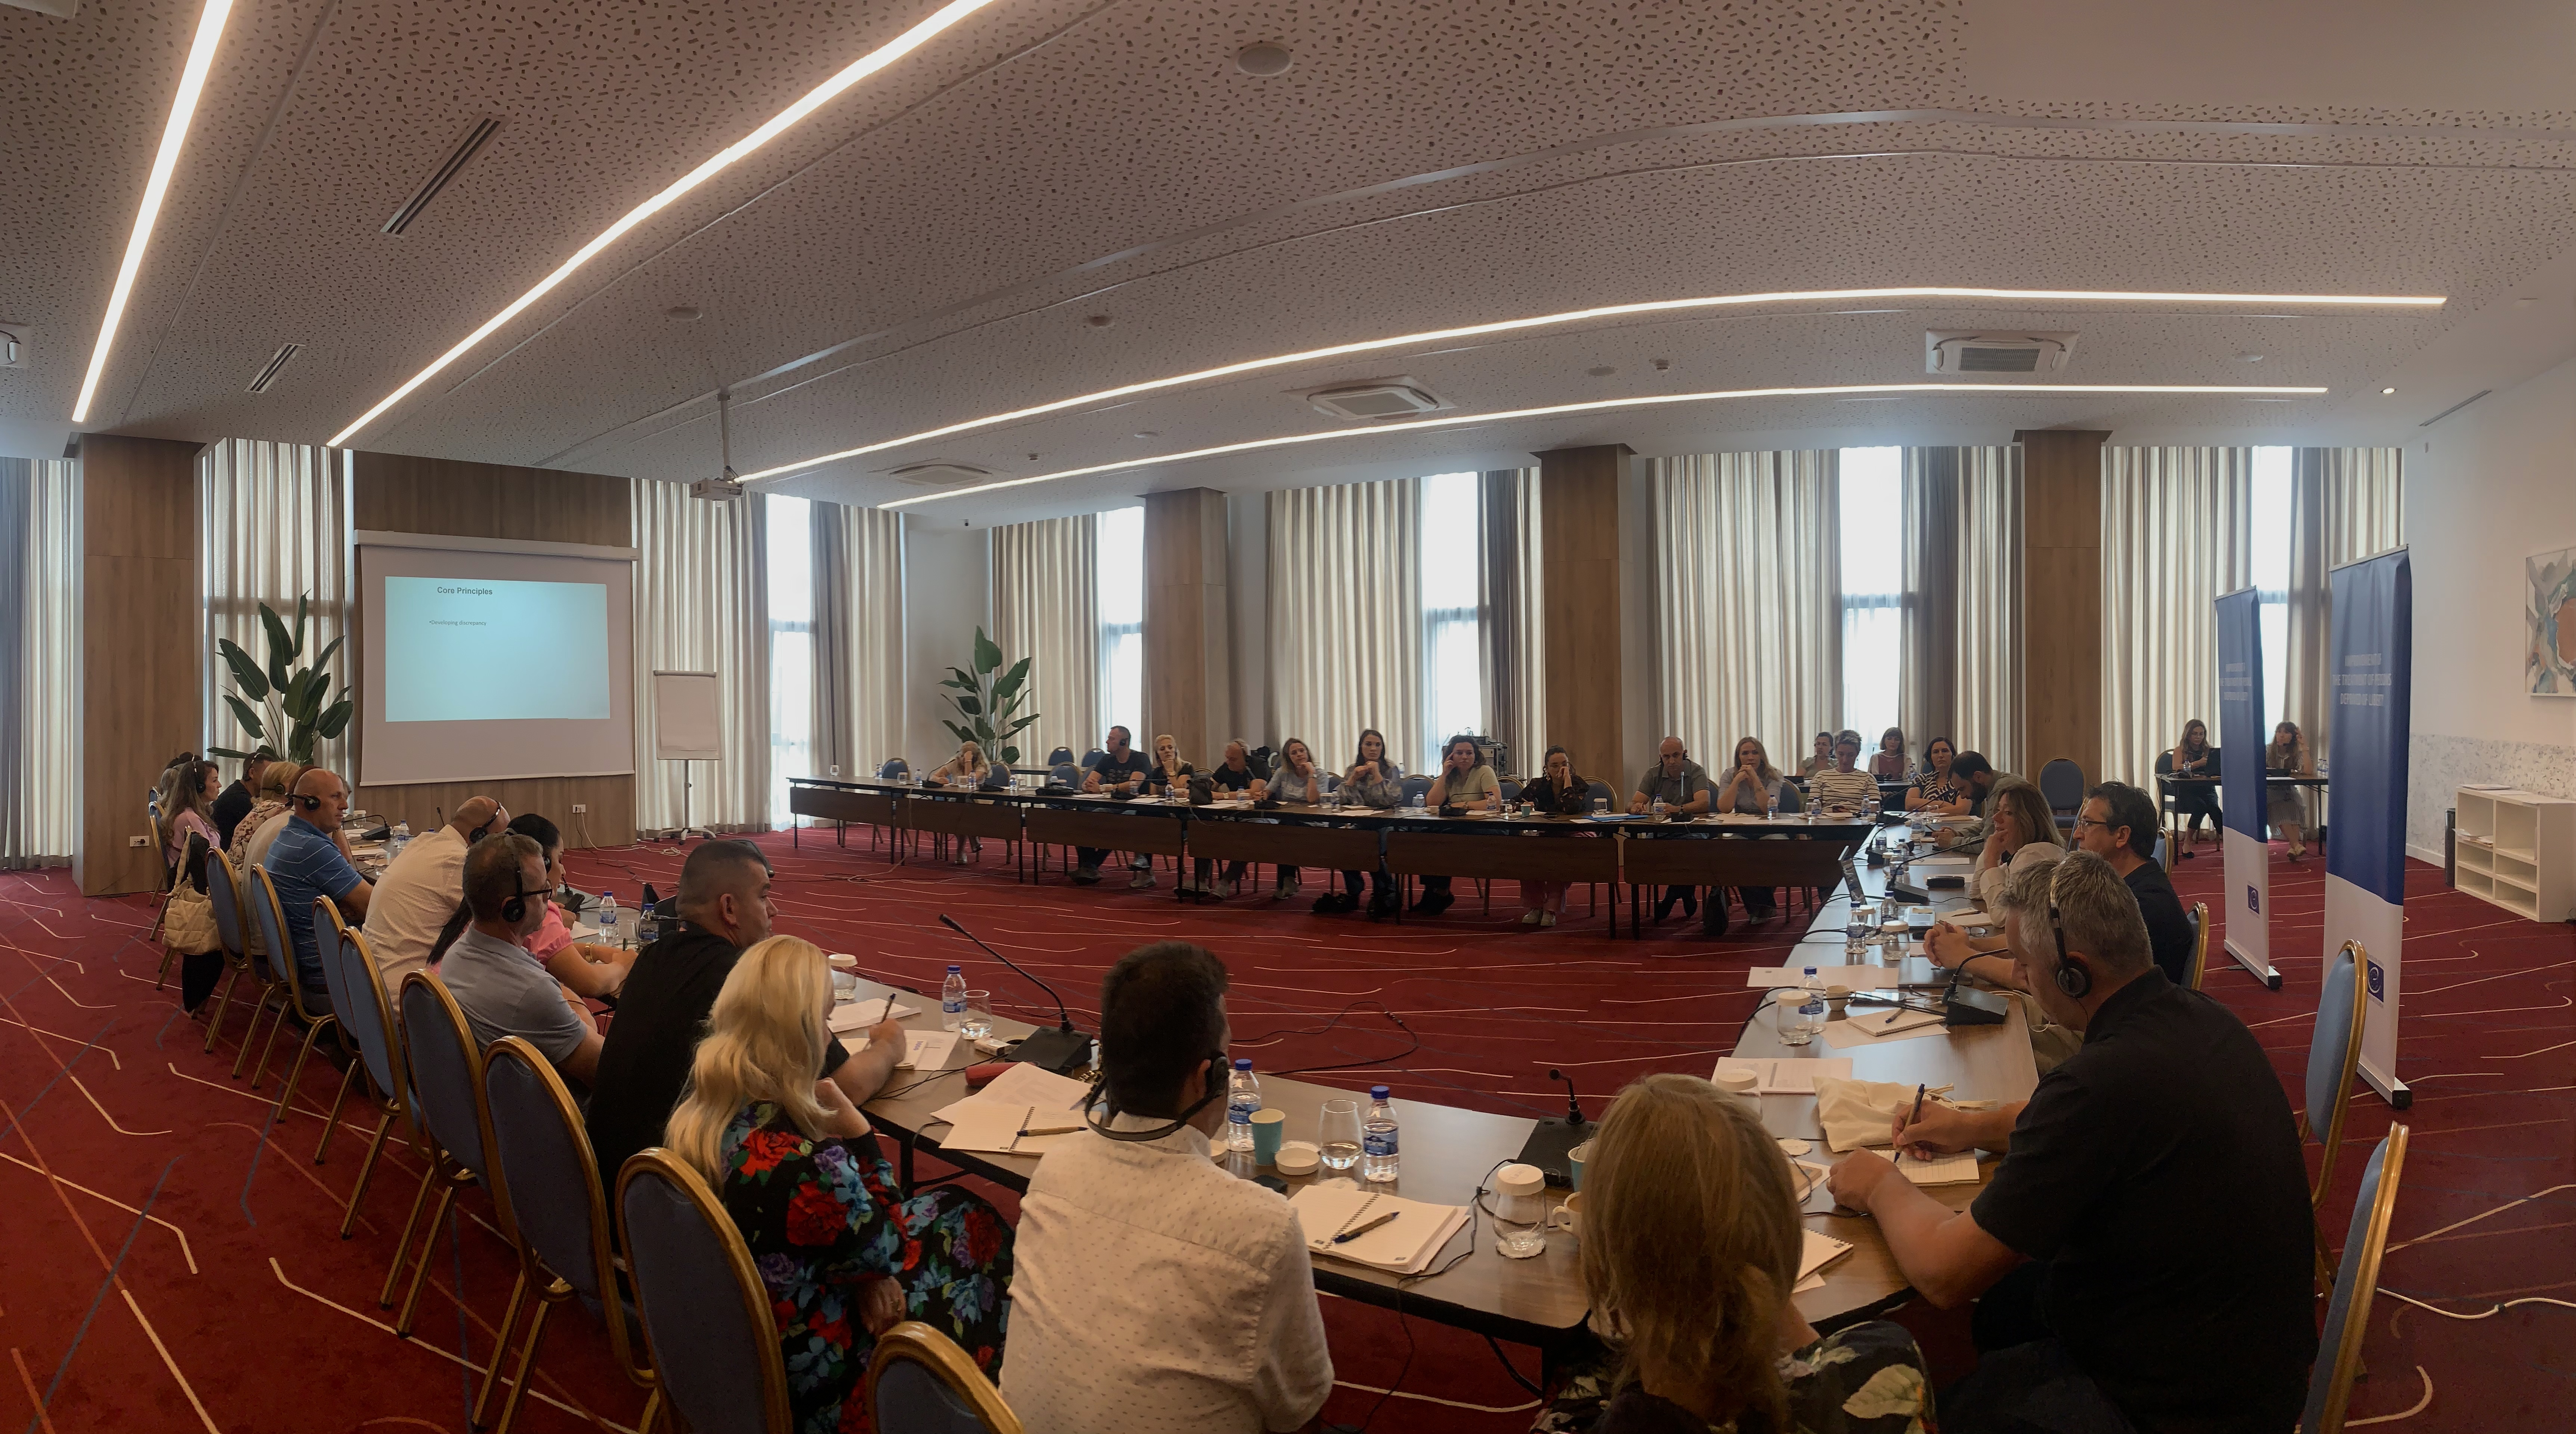 Council of Europe enhances skills of mental healthcare professionals and correctional staff on psychosocial programmes and rehabilitation methods